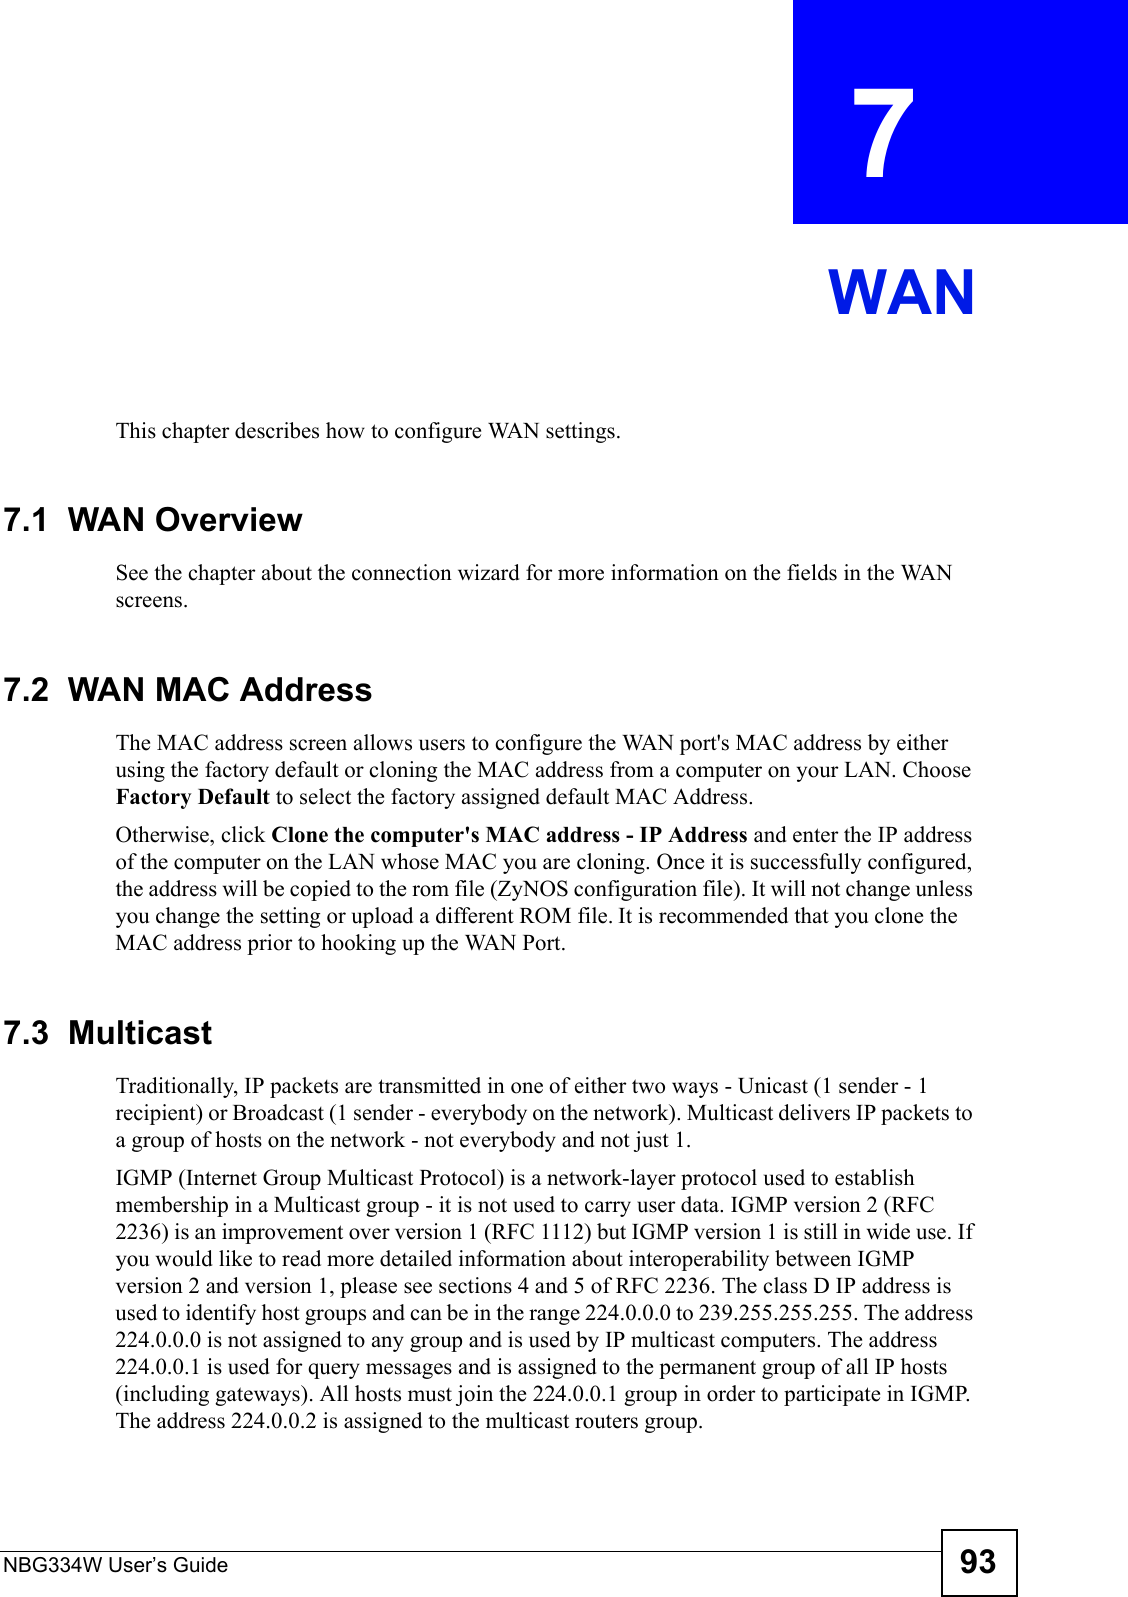 NBG334W User’s Guide 93CHAPTER  7 WANThis chapter describes how to configure WAN settings.7.1  WAN OverviewSee the chapter about the connection wizard for more information on the fields in the WAN screens.7.2  WAN MAC AddressThe MAC address screen allows users to configure the WAN port&apos;s MAC address by either using the factory default or cloning the MAC address from a computer on your LAN. Choose Factory Default to select the factory assigned default MAC Address.Otherwise, click Clone the computer&apos;s MAC address - IP Address and enter the IP address of the computer on the LAN whose MAC you are cloning. Once it is successfully configured, the address will be copied to the rom file (ZyNOS configuration file). It will not change unless you change the setting or upload a different ROM file. It is recommended that you clone the MAC address prior to hooking up the WAN Port.7.3  MulticastTraditionally, IP packets are transmitted in one of either two ways - Unicast (1 sender - 1 recipient) or Broadcast (1 sender - everybody on the network). Multicast delivers IP packets to a group of hosts on the network - not everybody and not just 1. IGMP (Internet Group Multicast Protocol) is a network-layer protocol used to establish membership in a Multicast group - it is not used to carry user data. IGMP version 2 (RFC 2236) is an improvement over version 1 (RFC 1112) but IGMP version 1 is still in wide use. If you would like to read more detailed information about interoperability between IGMP version 2 and version 1, please see sections 4 and 5 of RFC 2236. The class D IP address is used to identify host groups and can be in the range 224.0.0.0 to 239.255.255.255. The address 224.0.0.0 is not assigned to any group and is used by IP multicast computers. The address 224.0.0.1 is used for query messages and is assigned to the permanent group of all IP hosts (including gateways). All hosts must join the 224.0.0.1 group in order to participate in IGMP. The address 224.0.0.2 is assigned to the multicast routers group. 